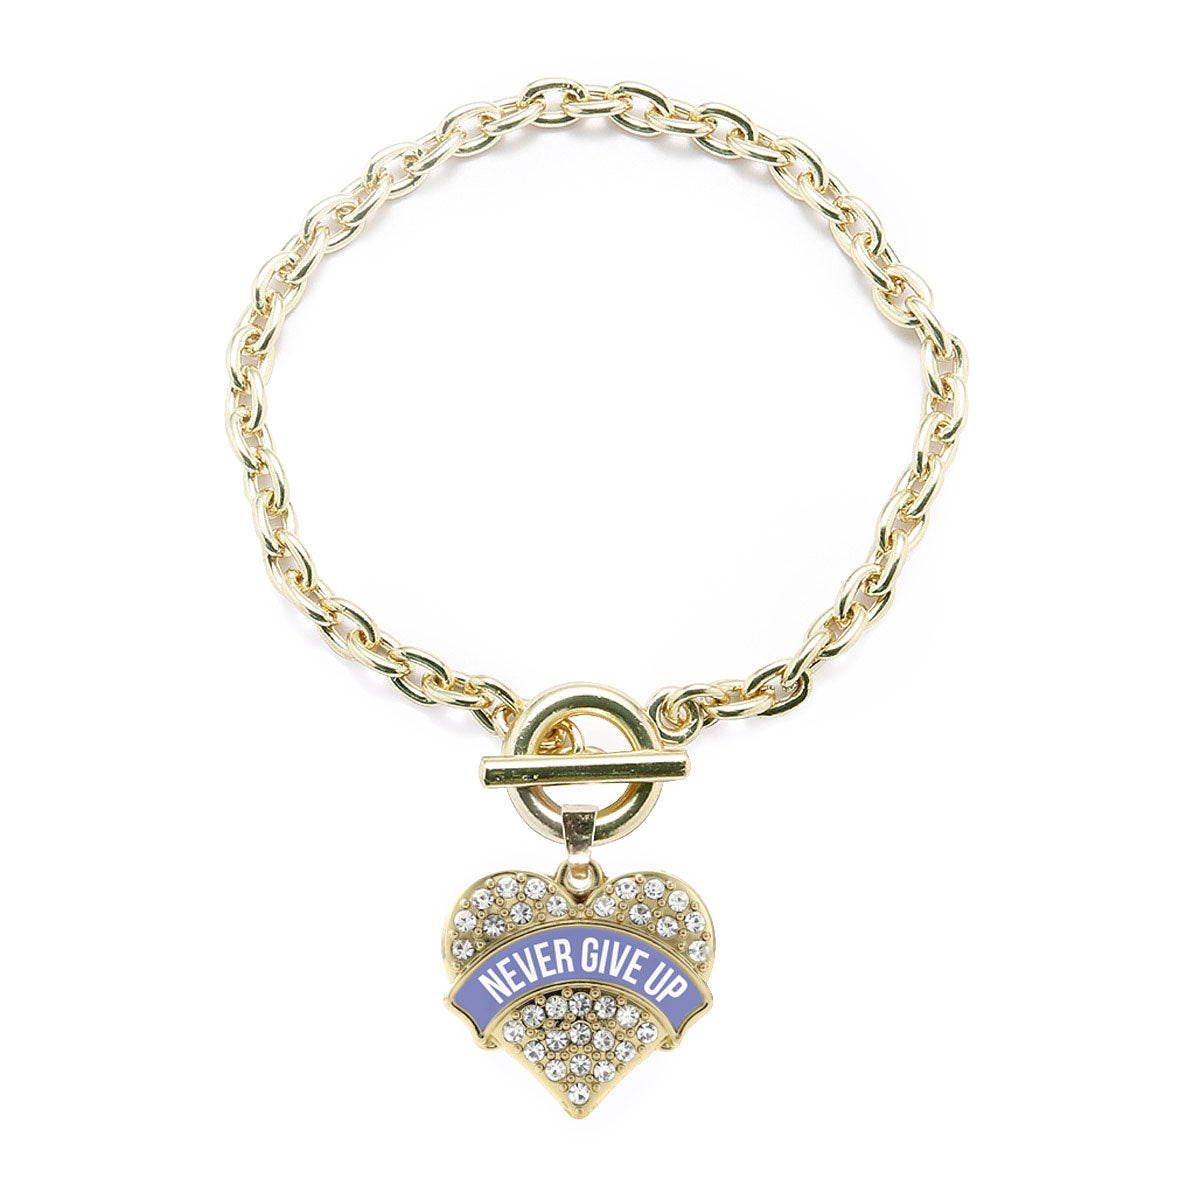 Gold Periwinkle Never Give up Pave Heart Charm Toggle Bracelet